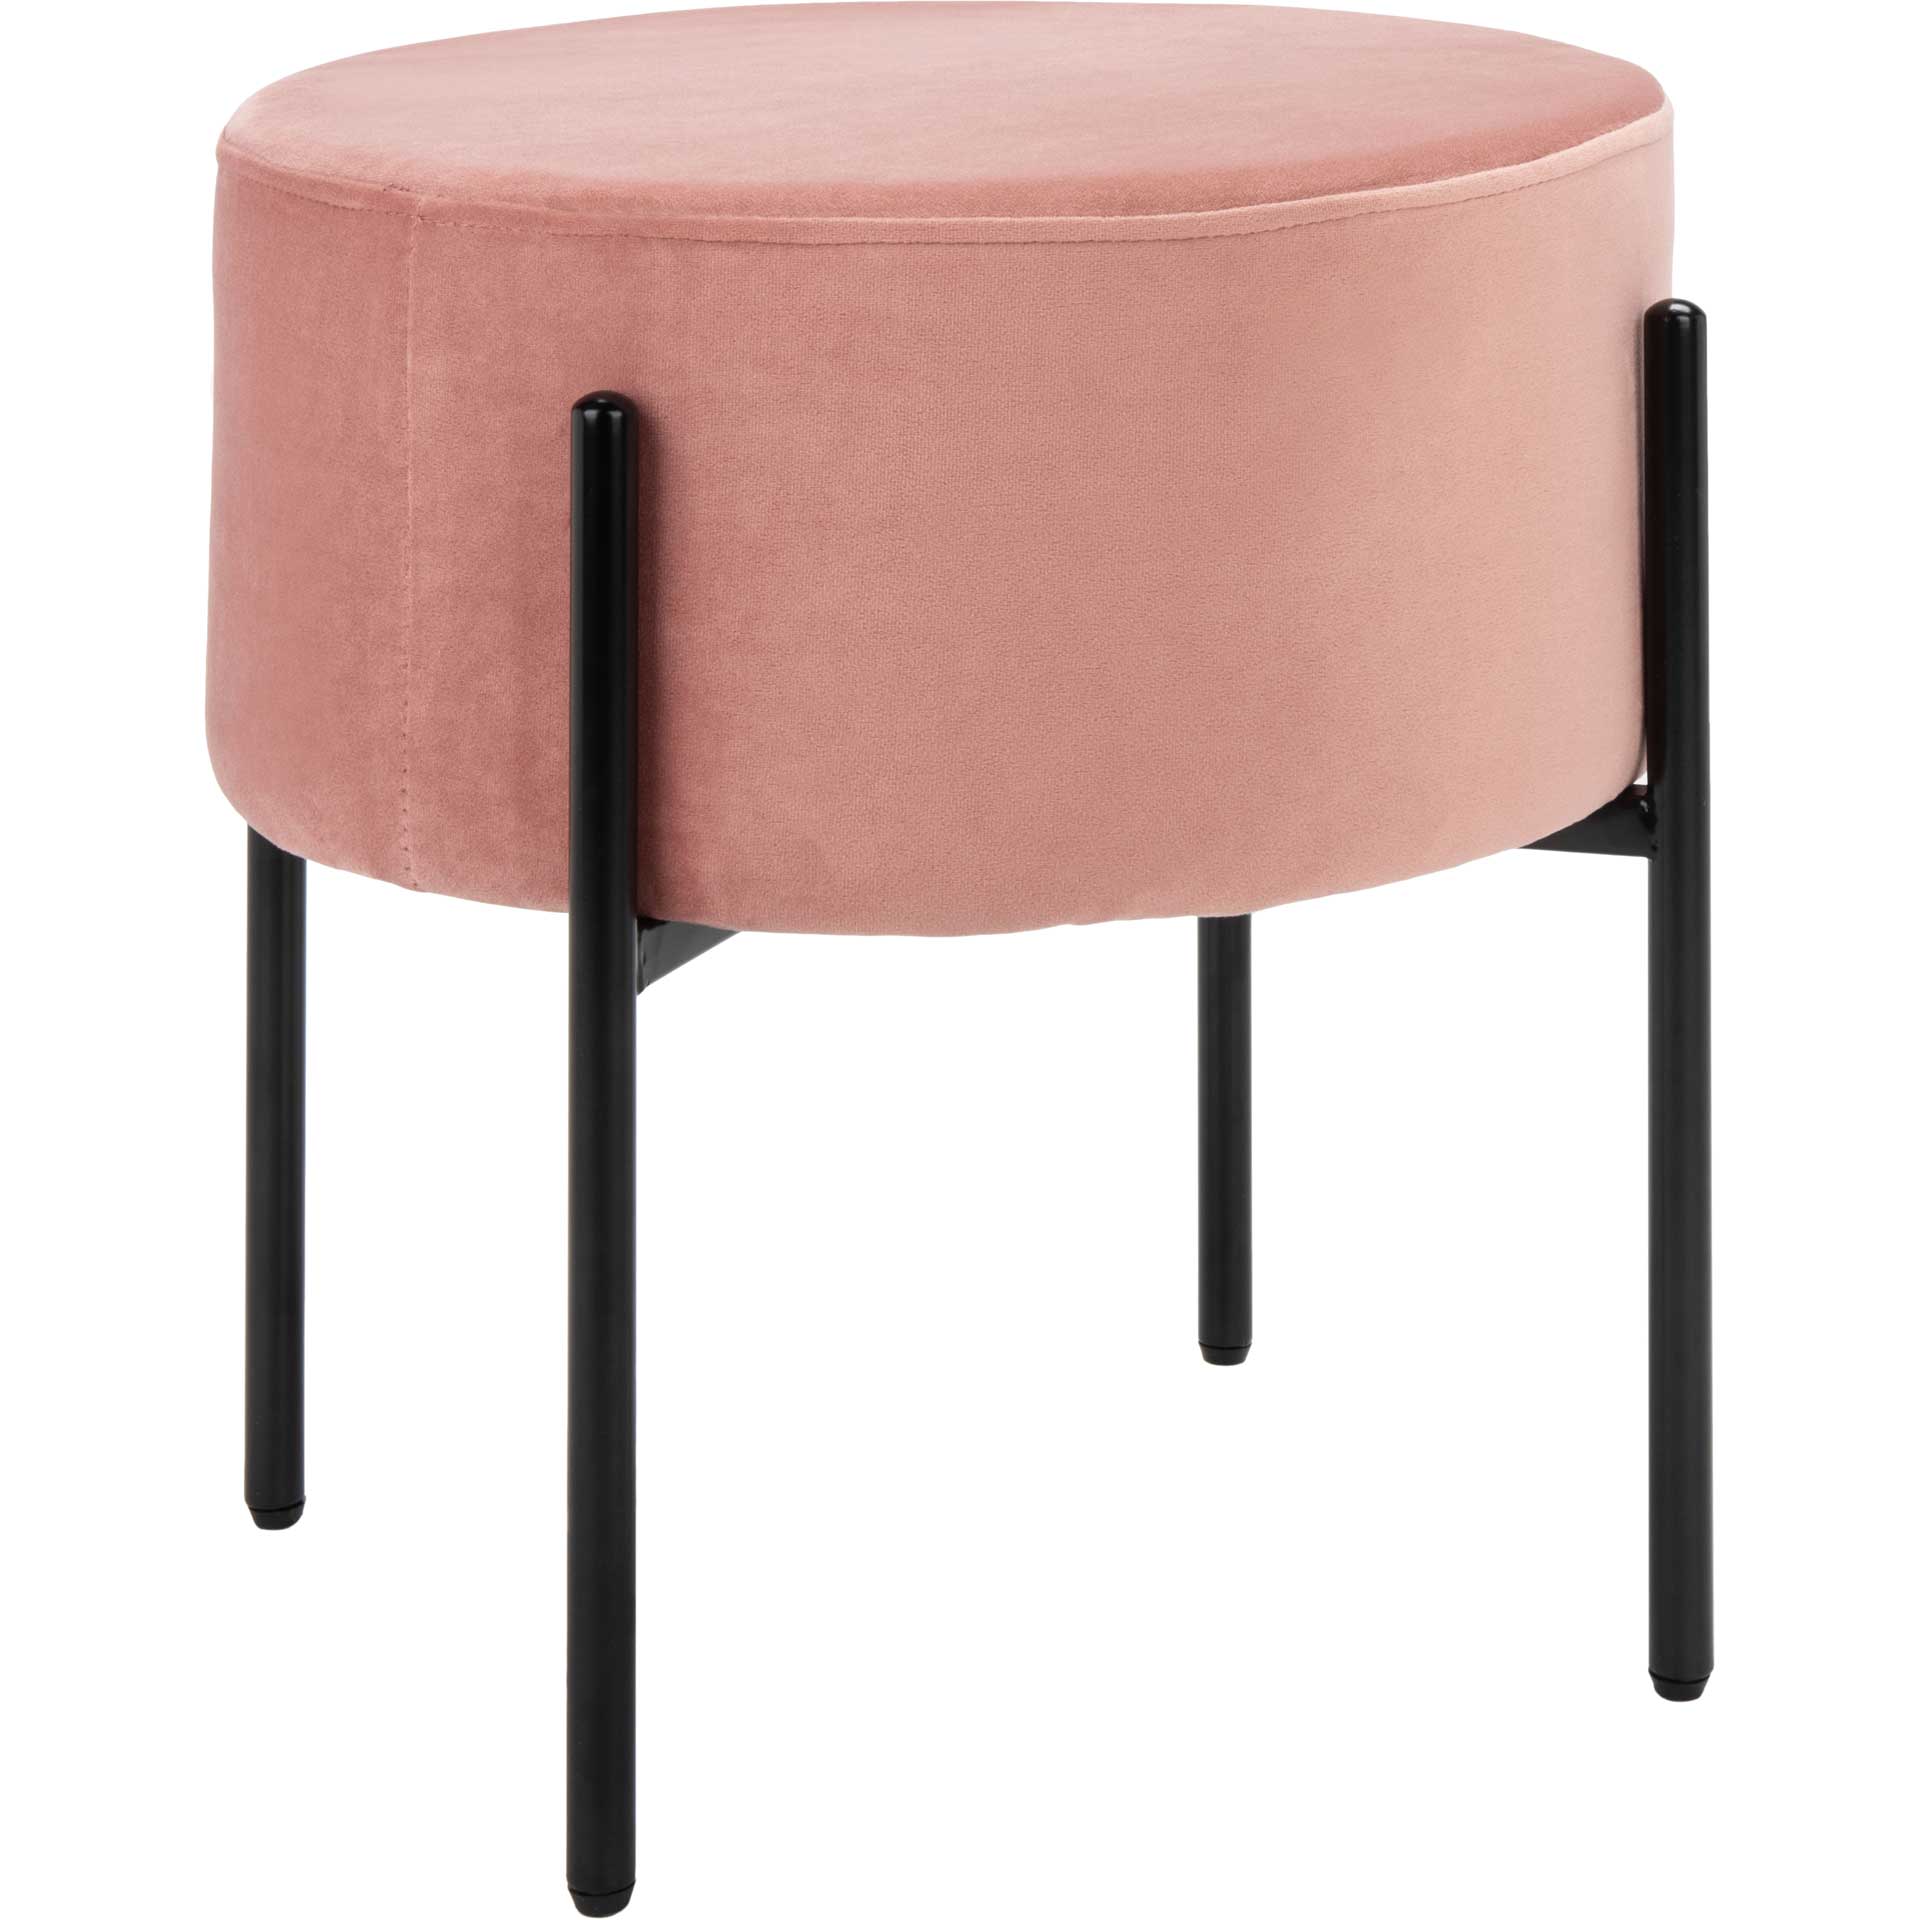 Lincoln Round Ottoman Dusty Rose/Black